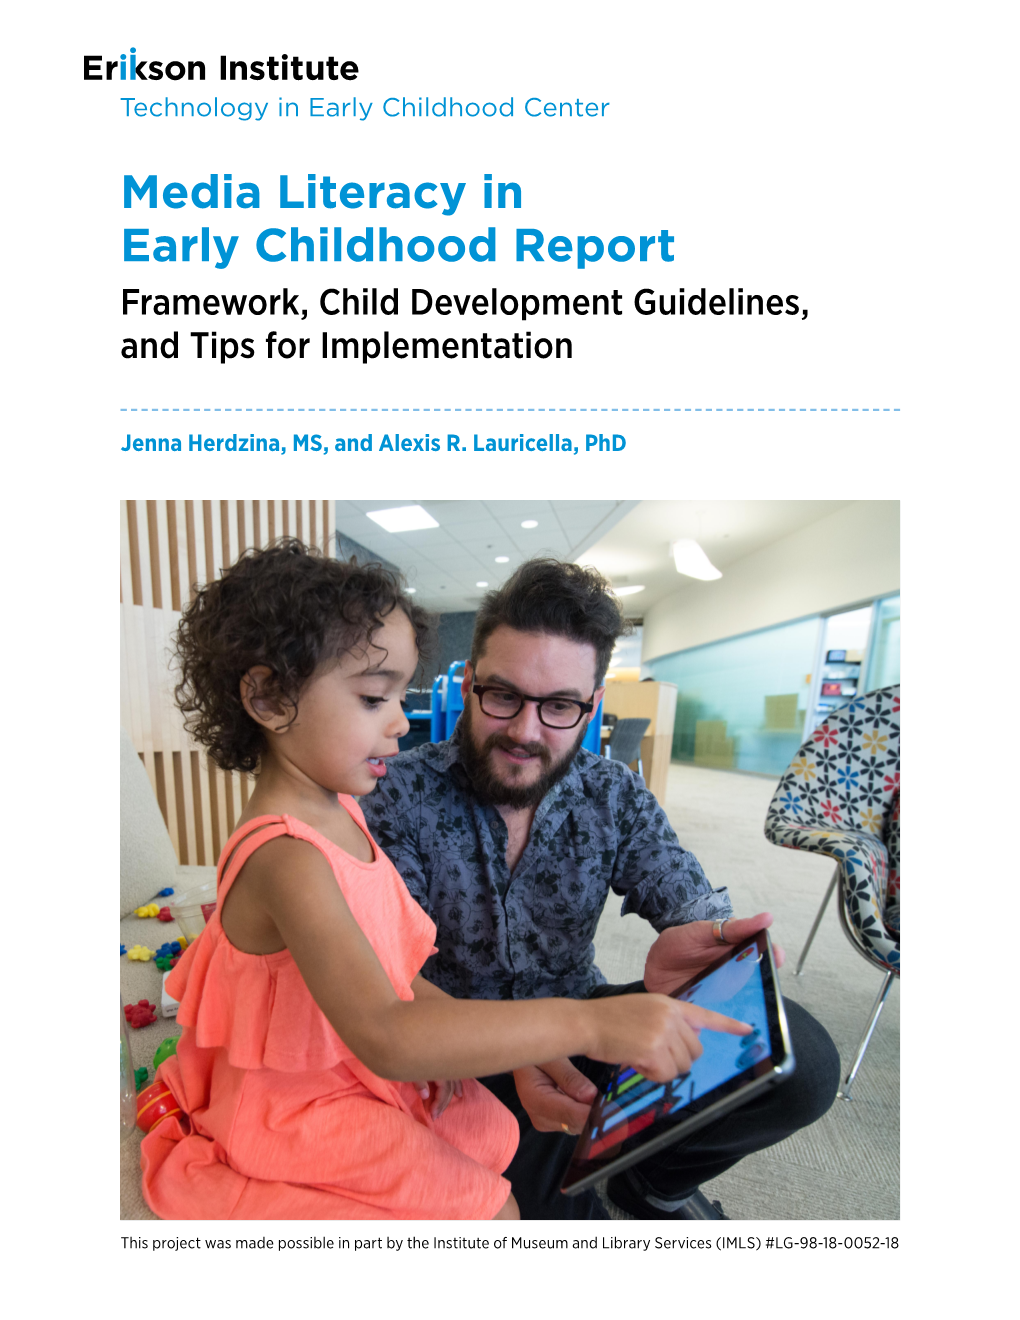 Media Literacy in Early Childhood Report Framework, Child Development Guidelines, and Tips for Implementation